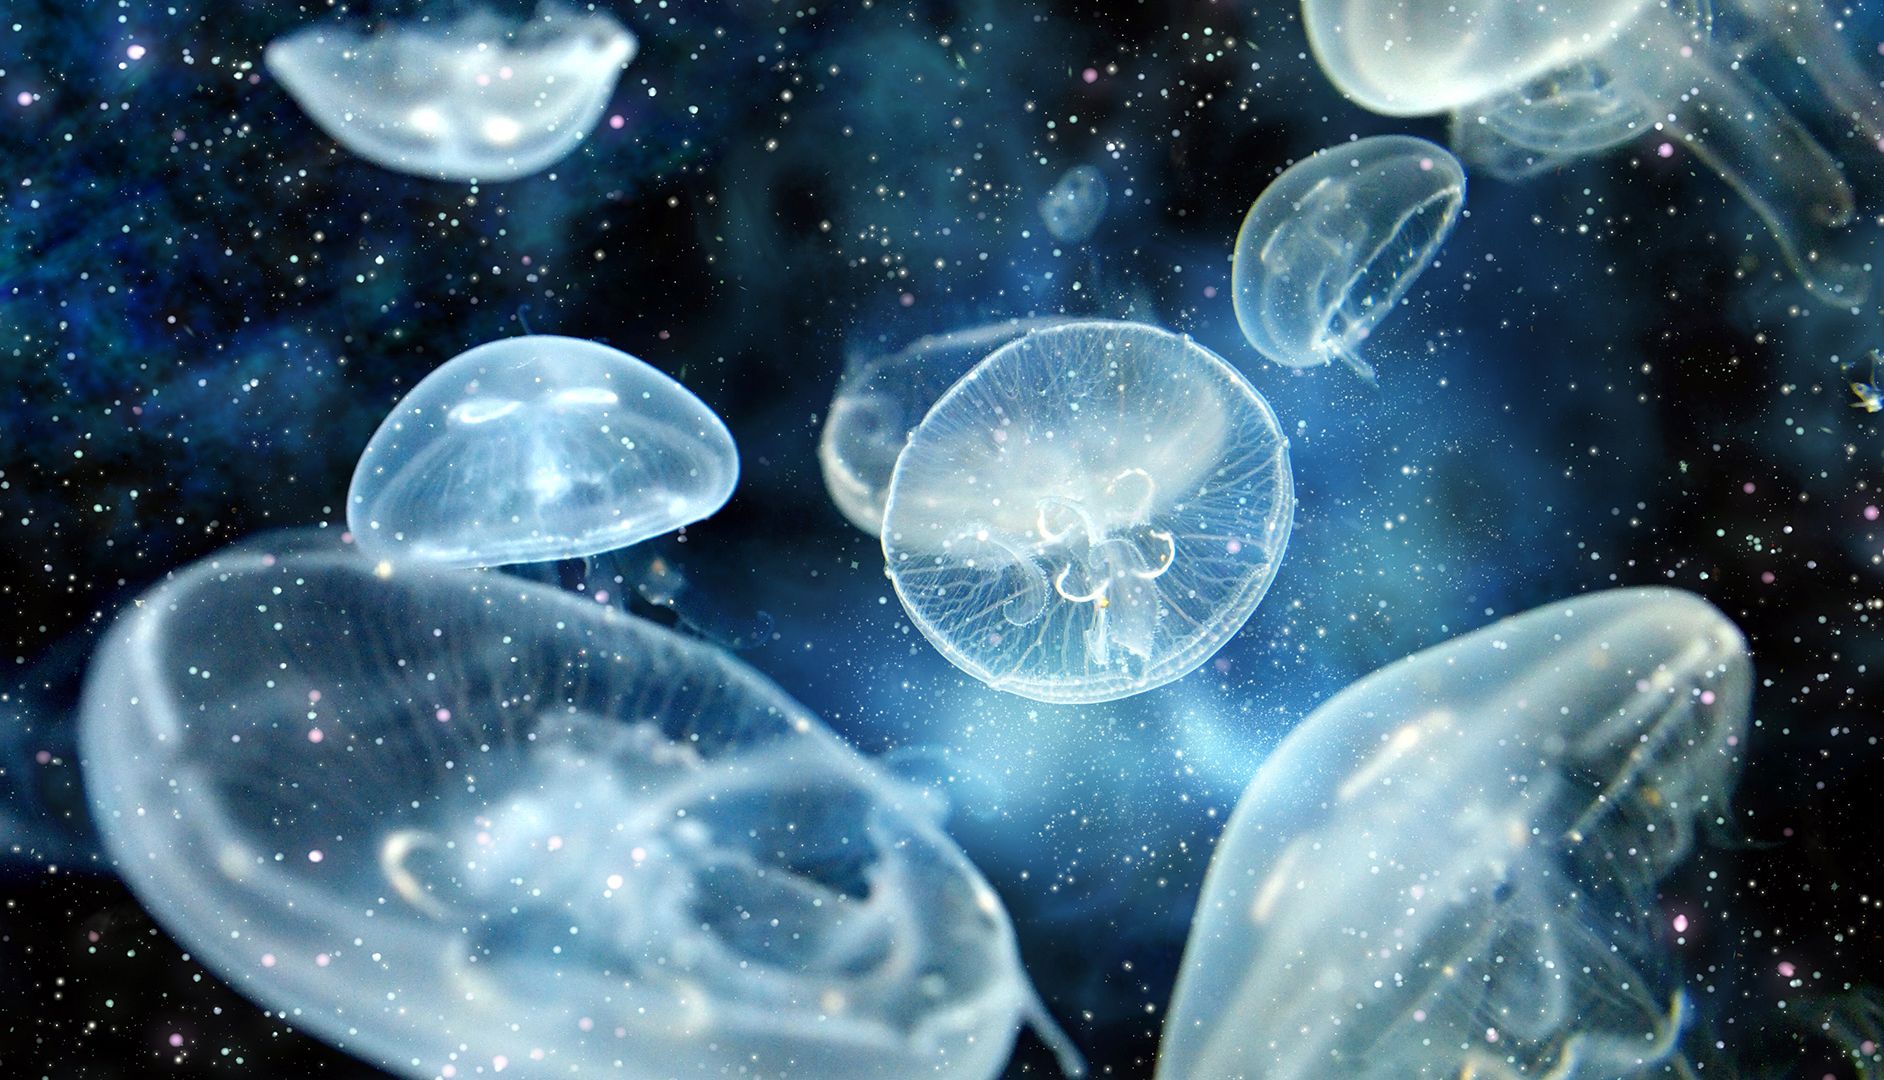 Wallpaper Jelly fishes